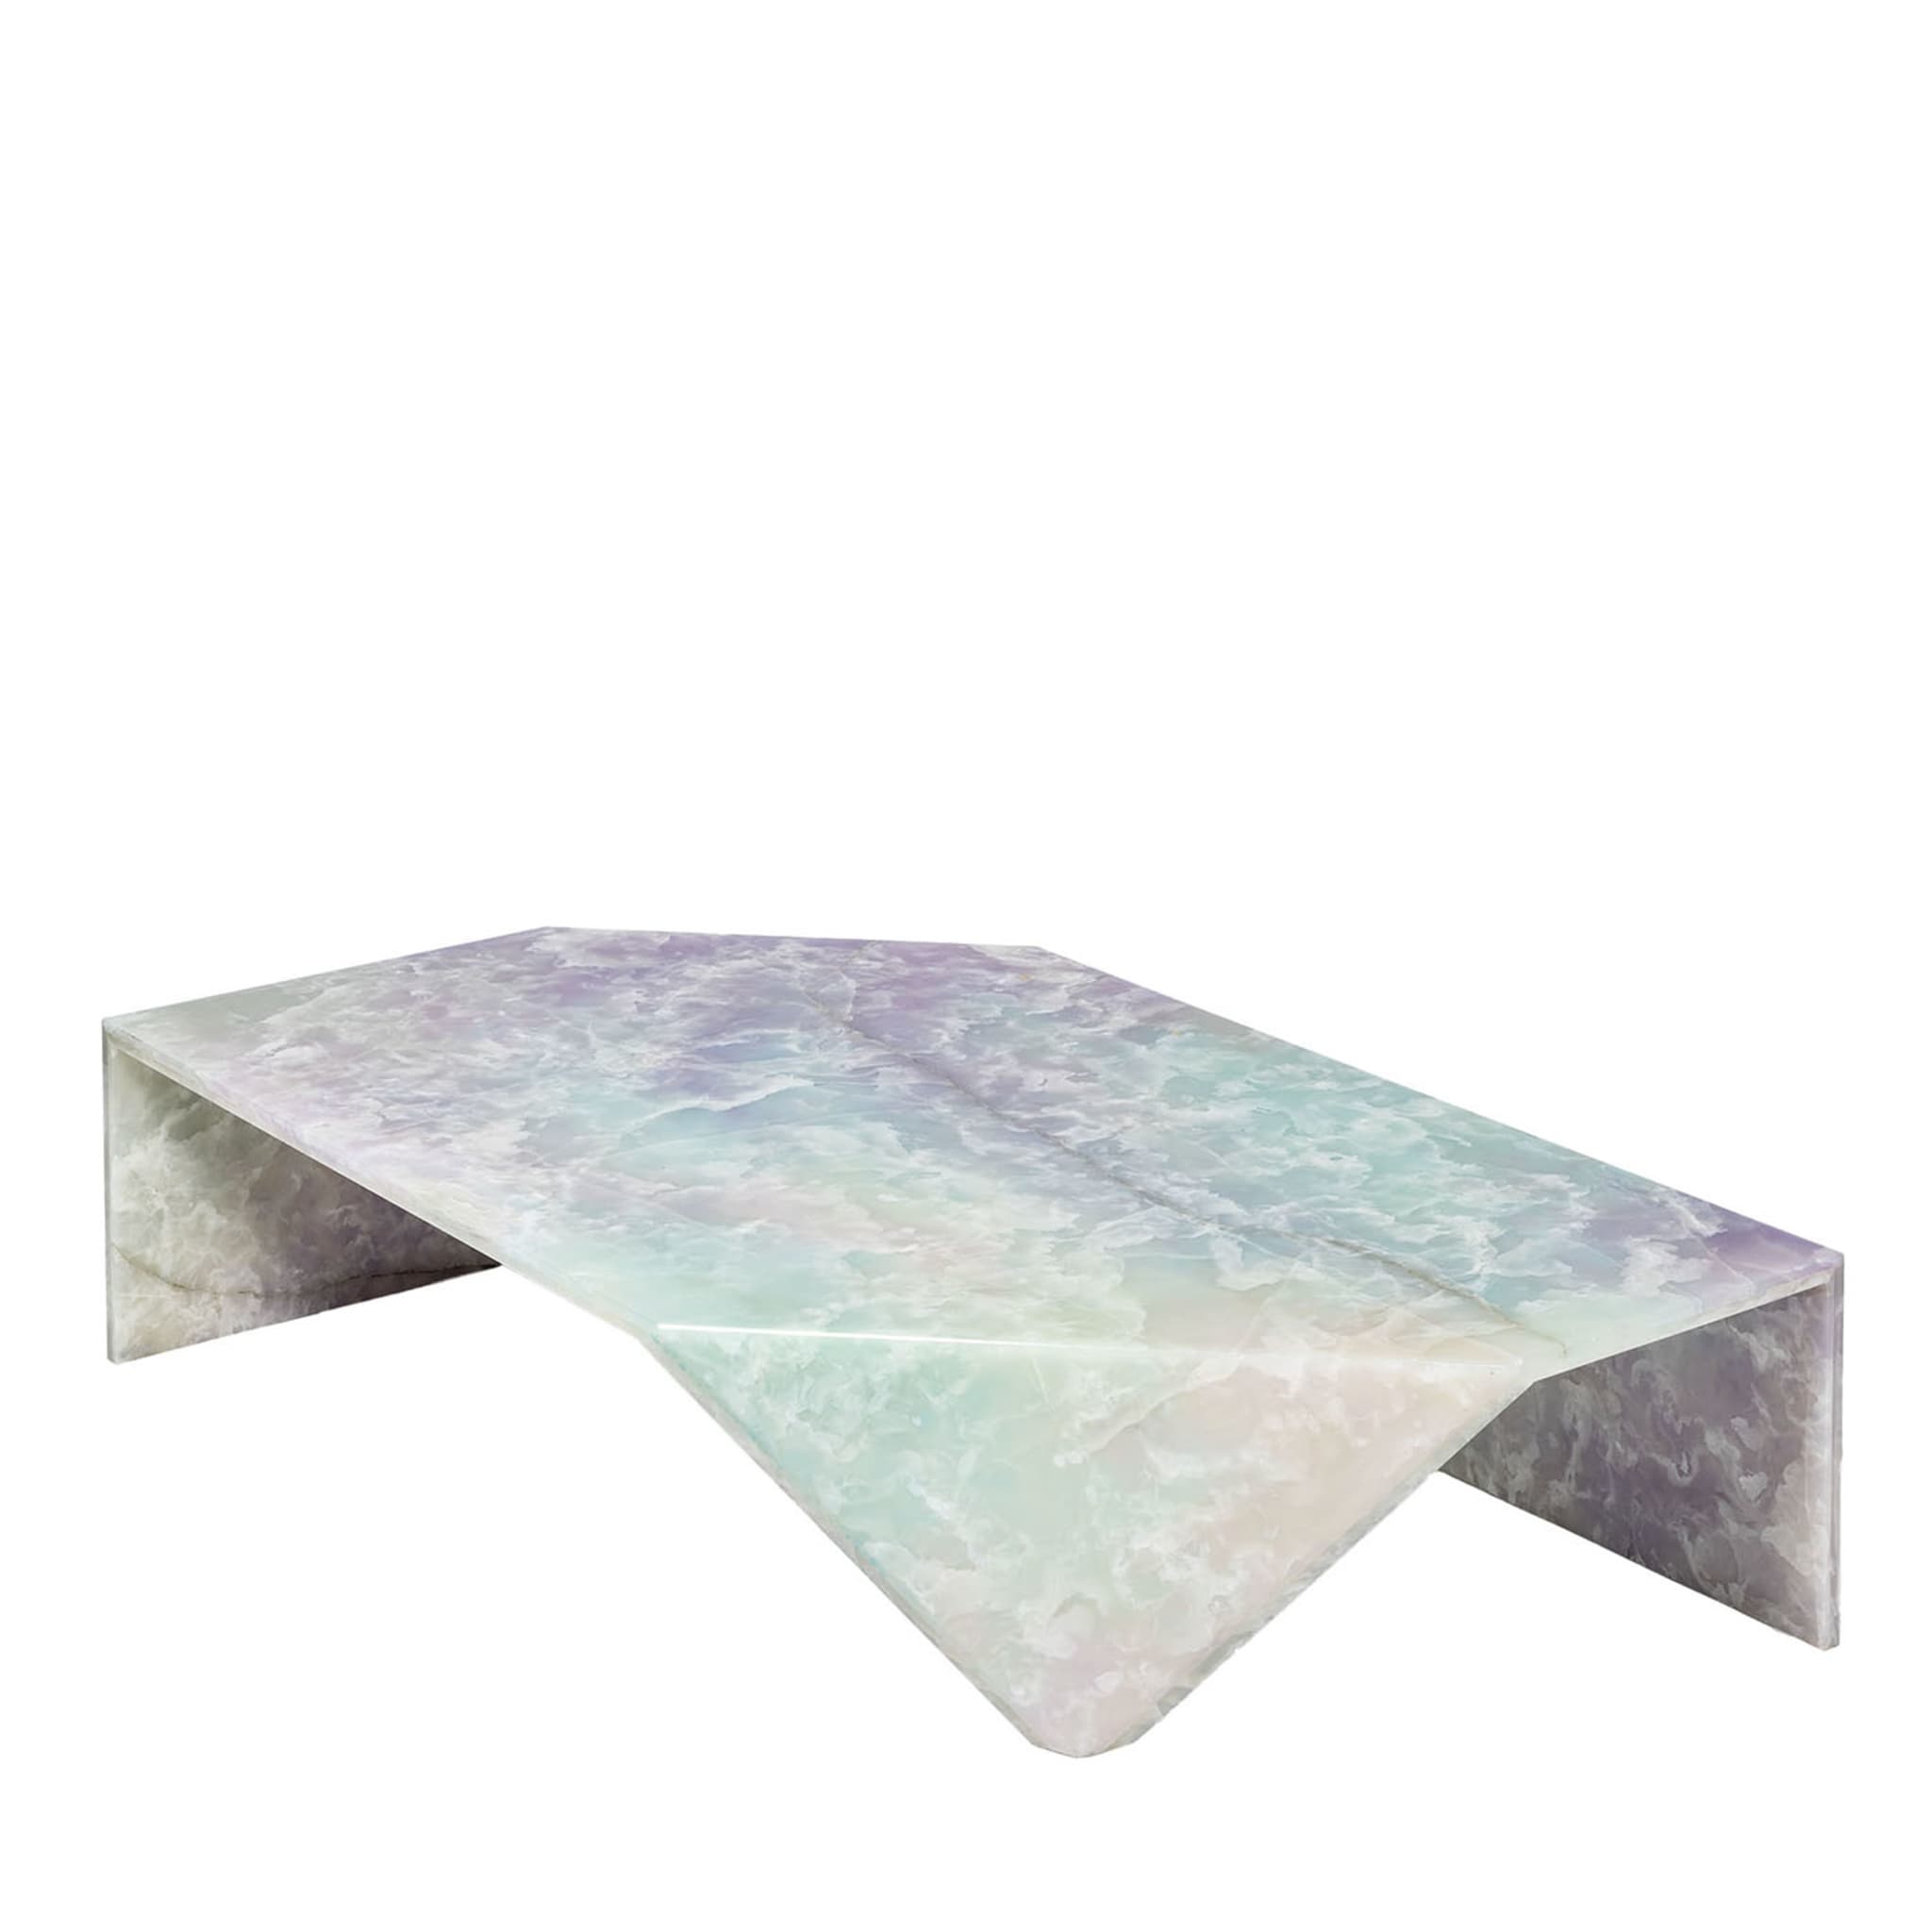 Origami Amethyst Coffee Table by Patricia Urquiola - Main view